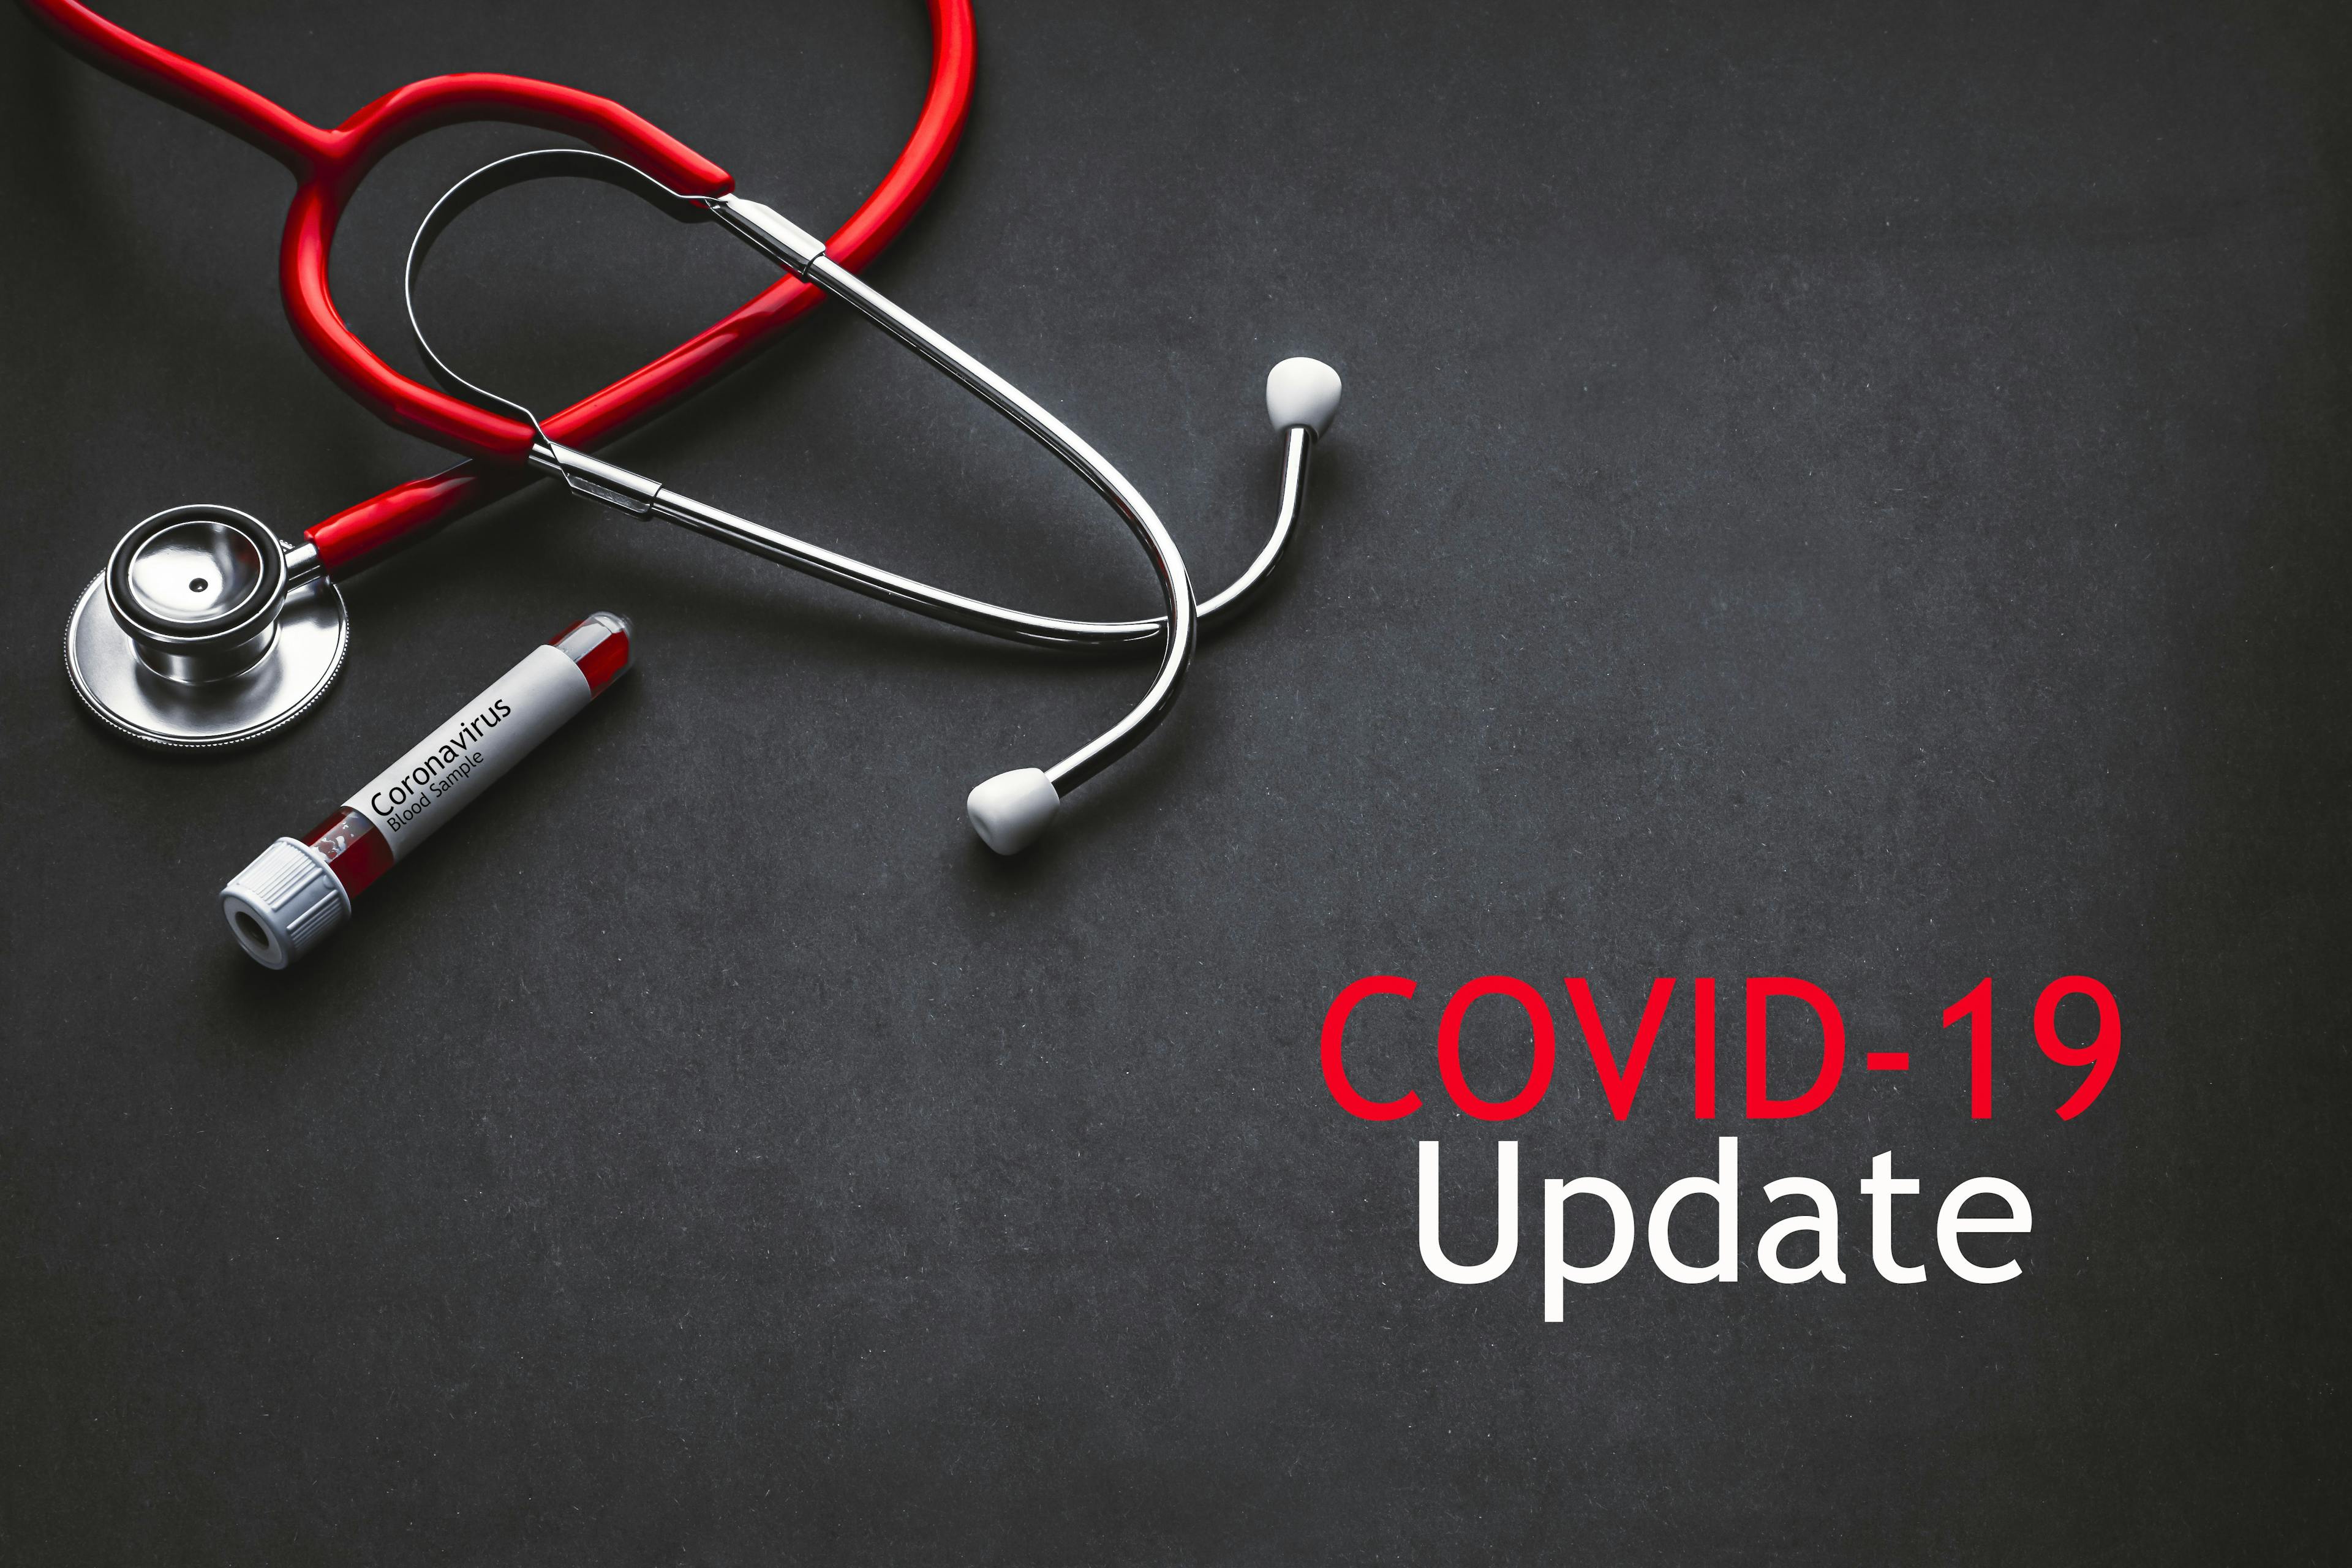 COVID-19 Update: Global Cases and Recoveries as of June 12, 2020